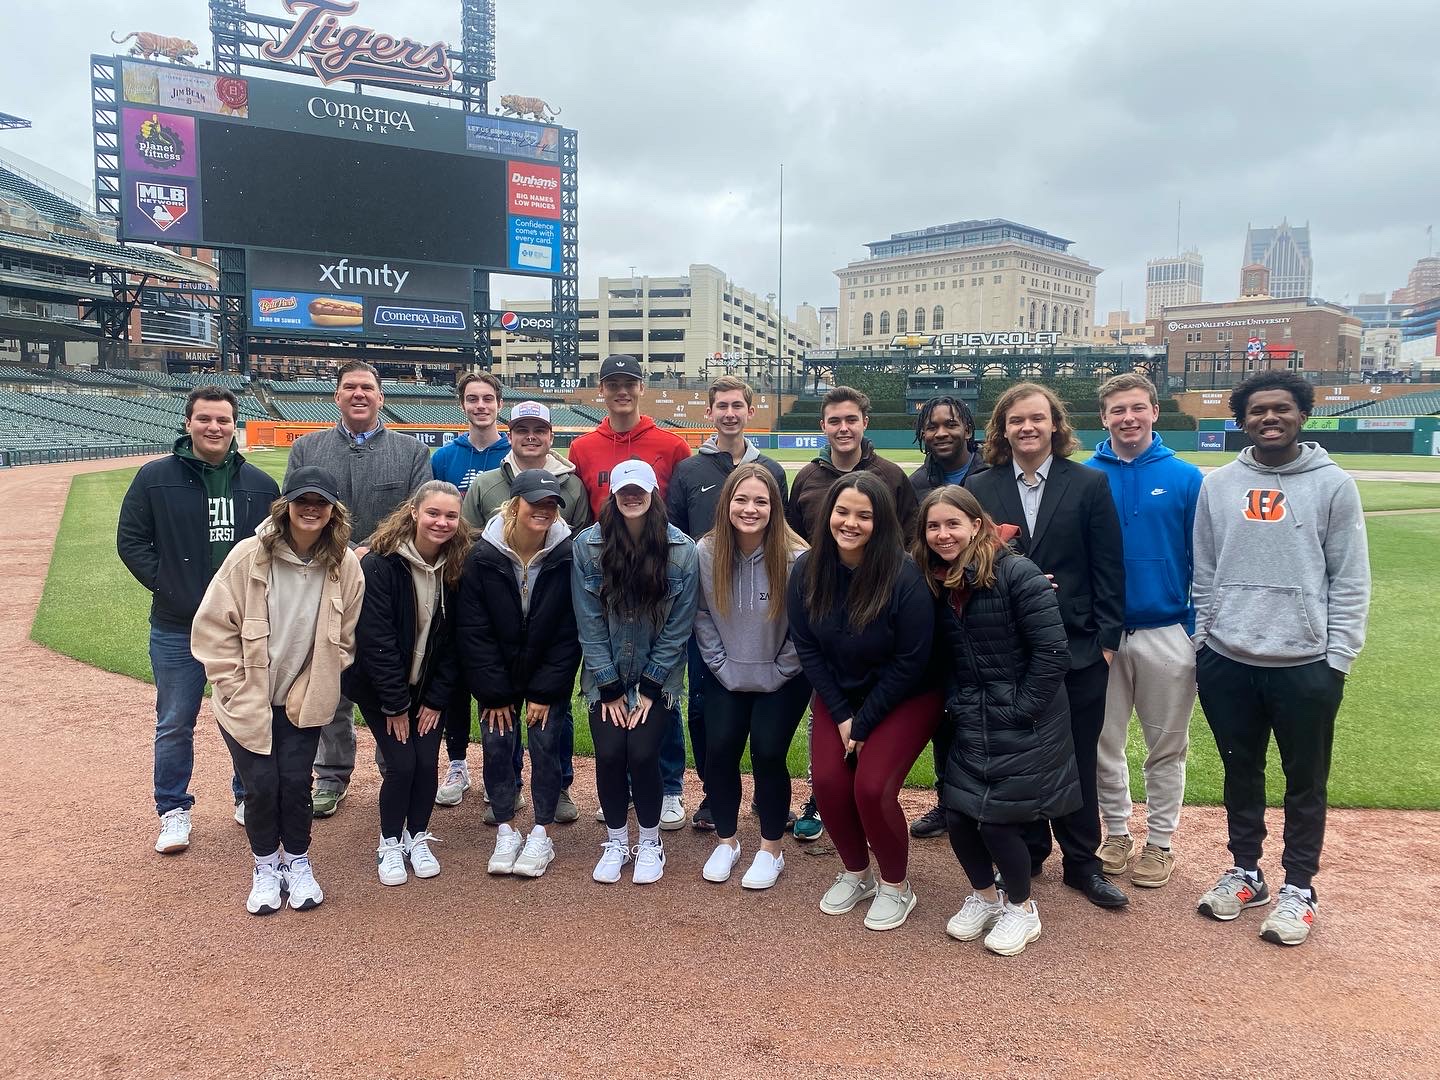  A group of Ohio University students standing together on a baseball field Sigma Alpha Sigma Mu students toured Comerica Park, home of the Detroit Tigers.